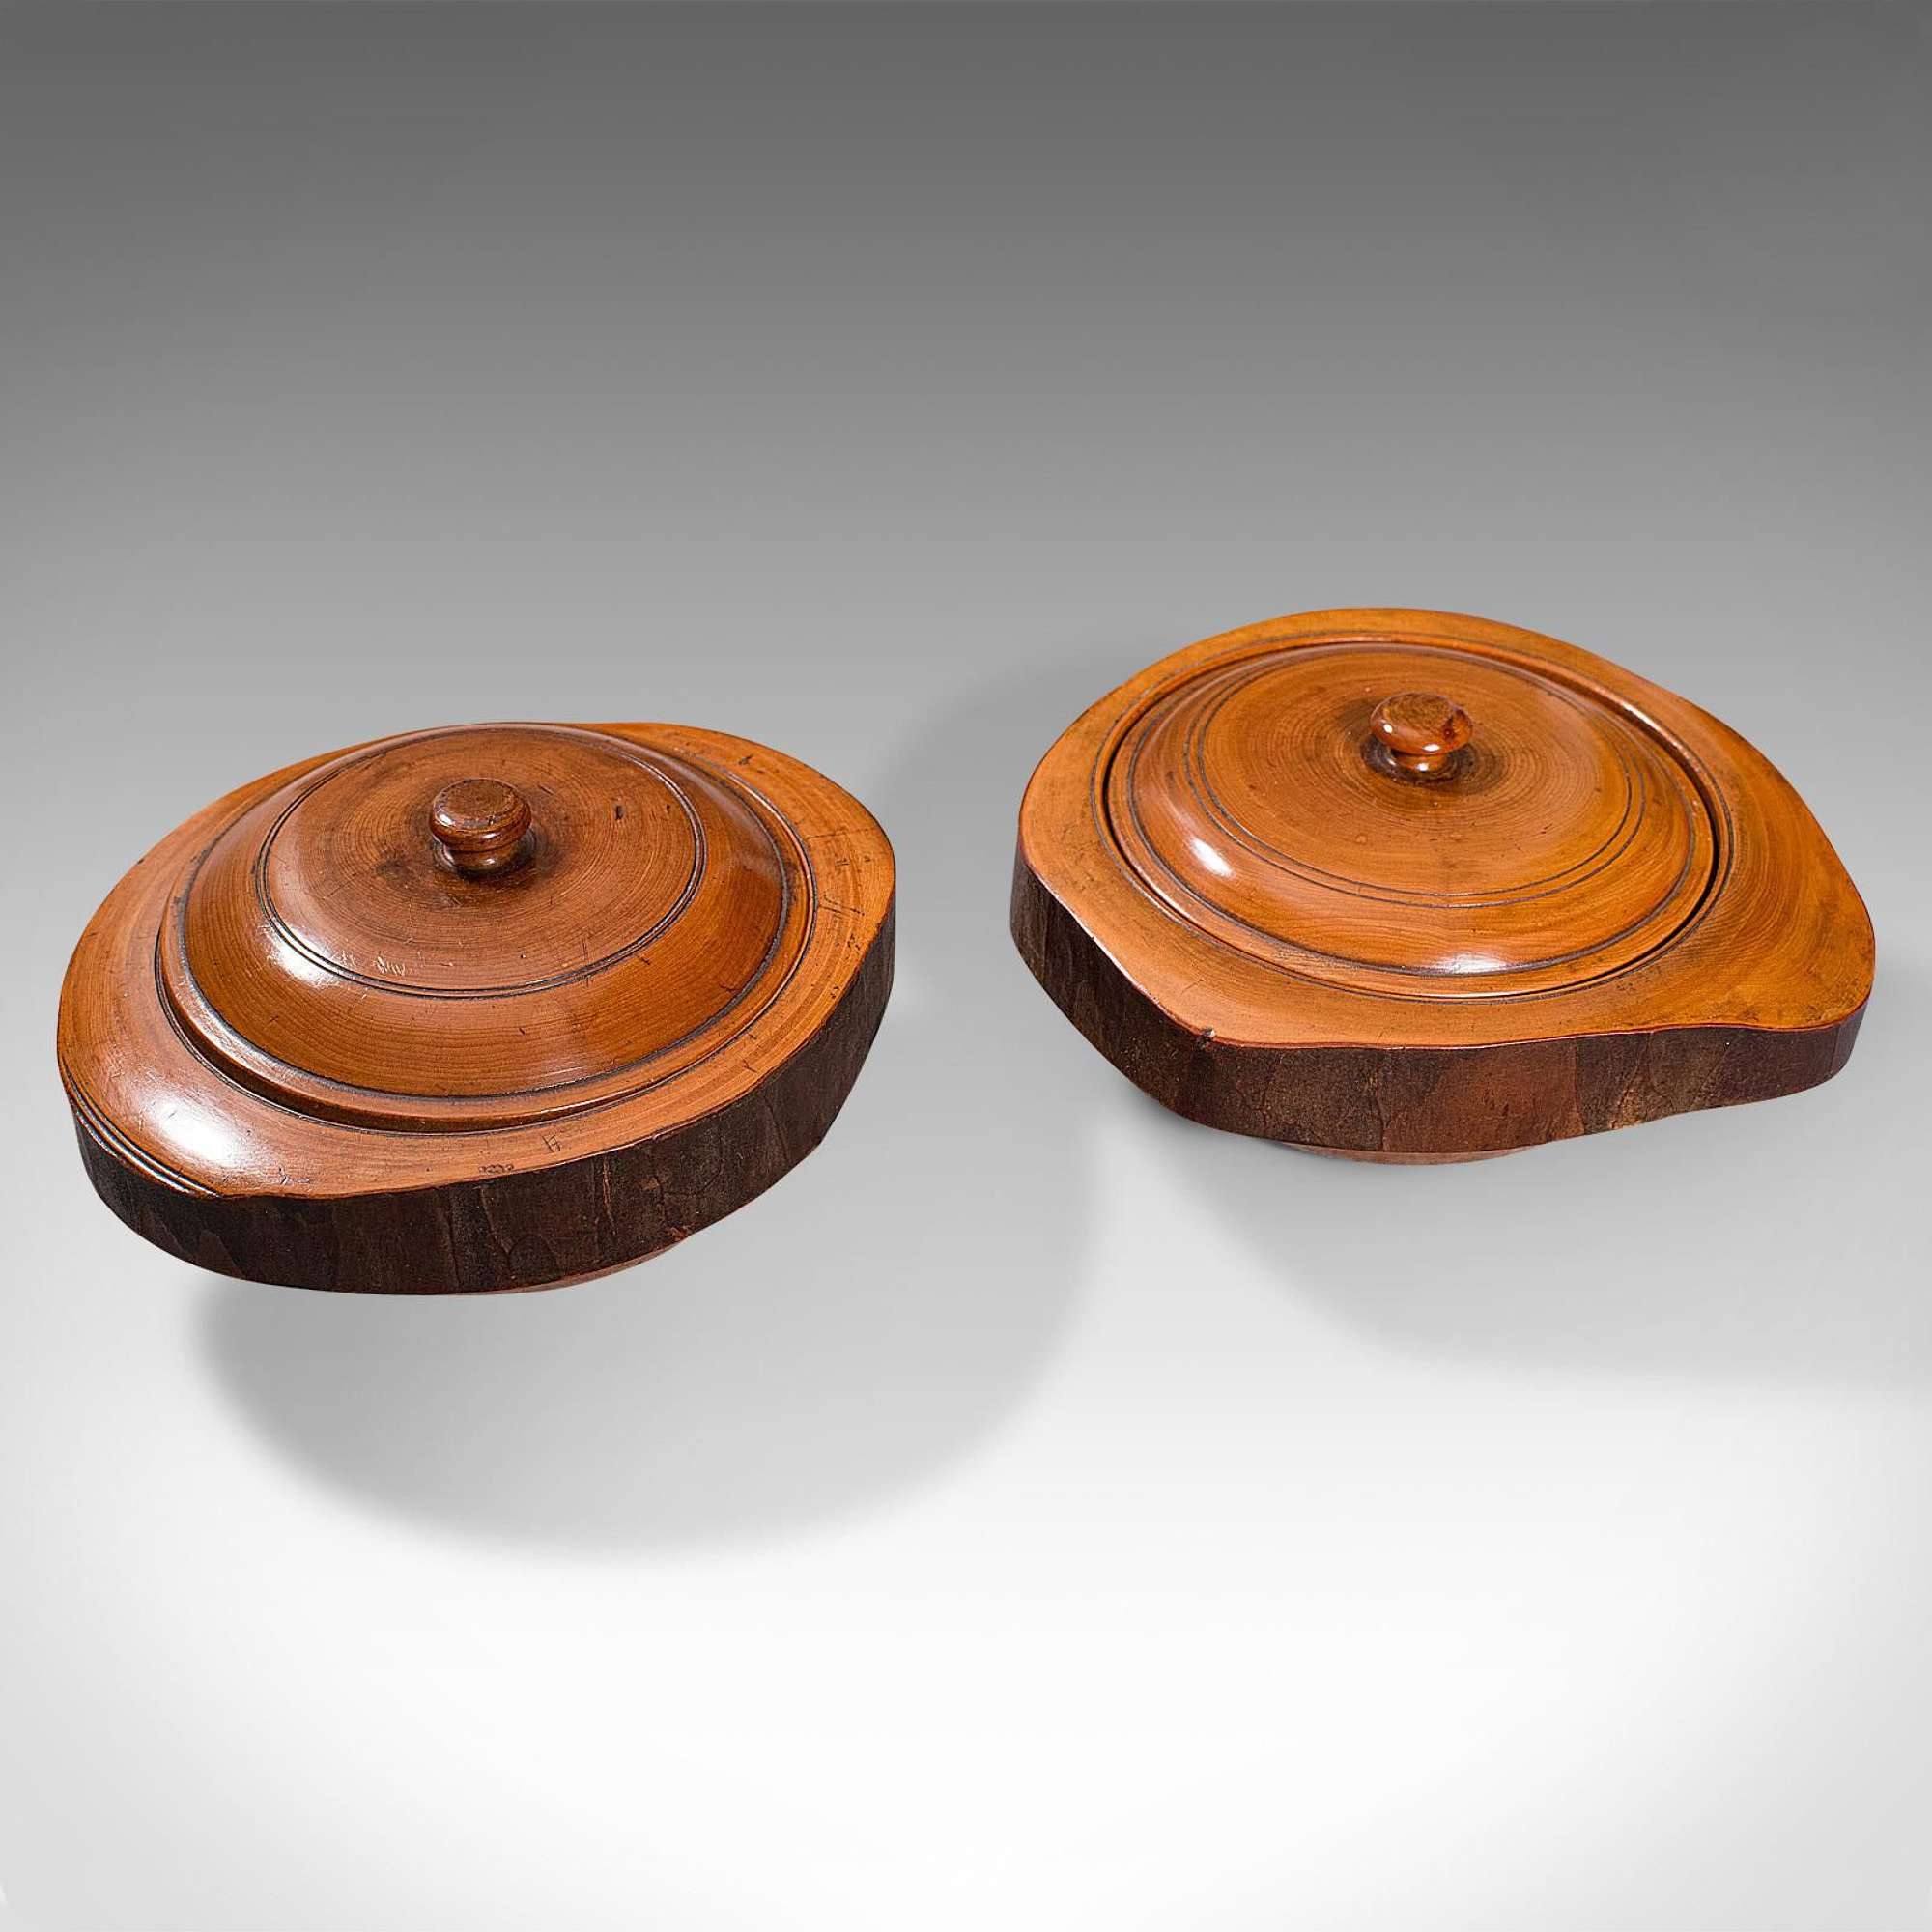 Pair Of Antique Carved Lidded Bowls, Treen, English, Yew, Victorian, Circa 1900